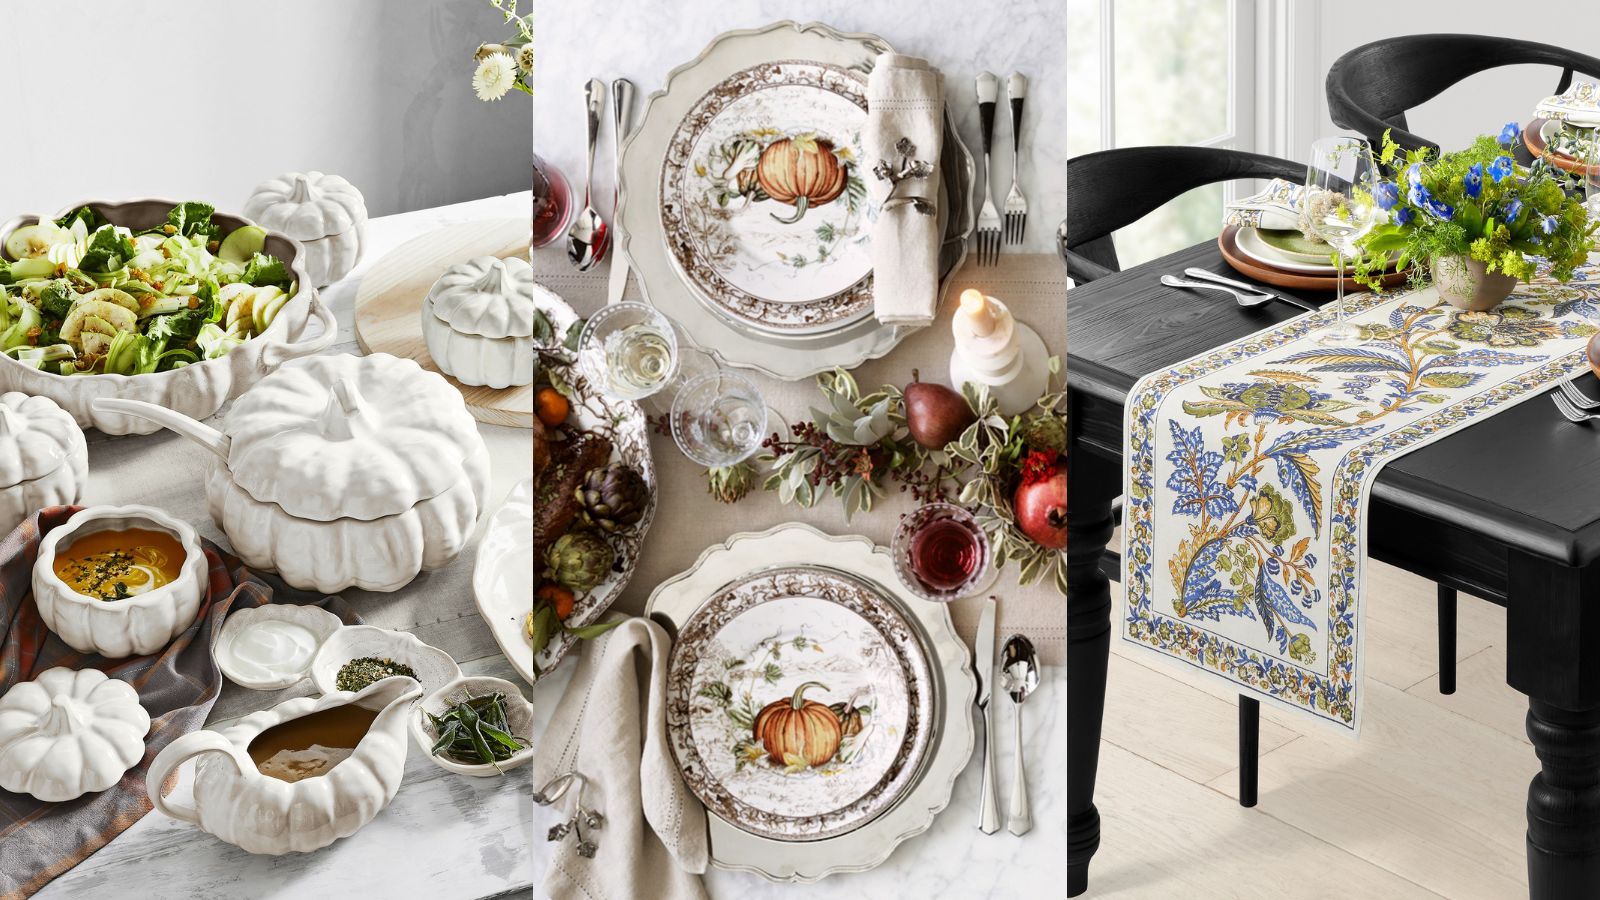 Williams Sonoma  Dinnerware, Kitchen inspirations, French country kitchen